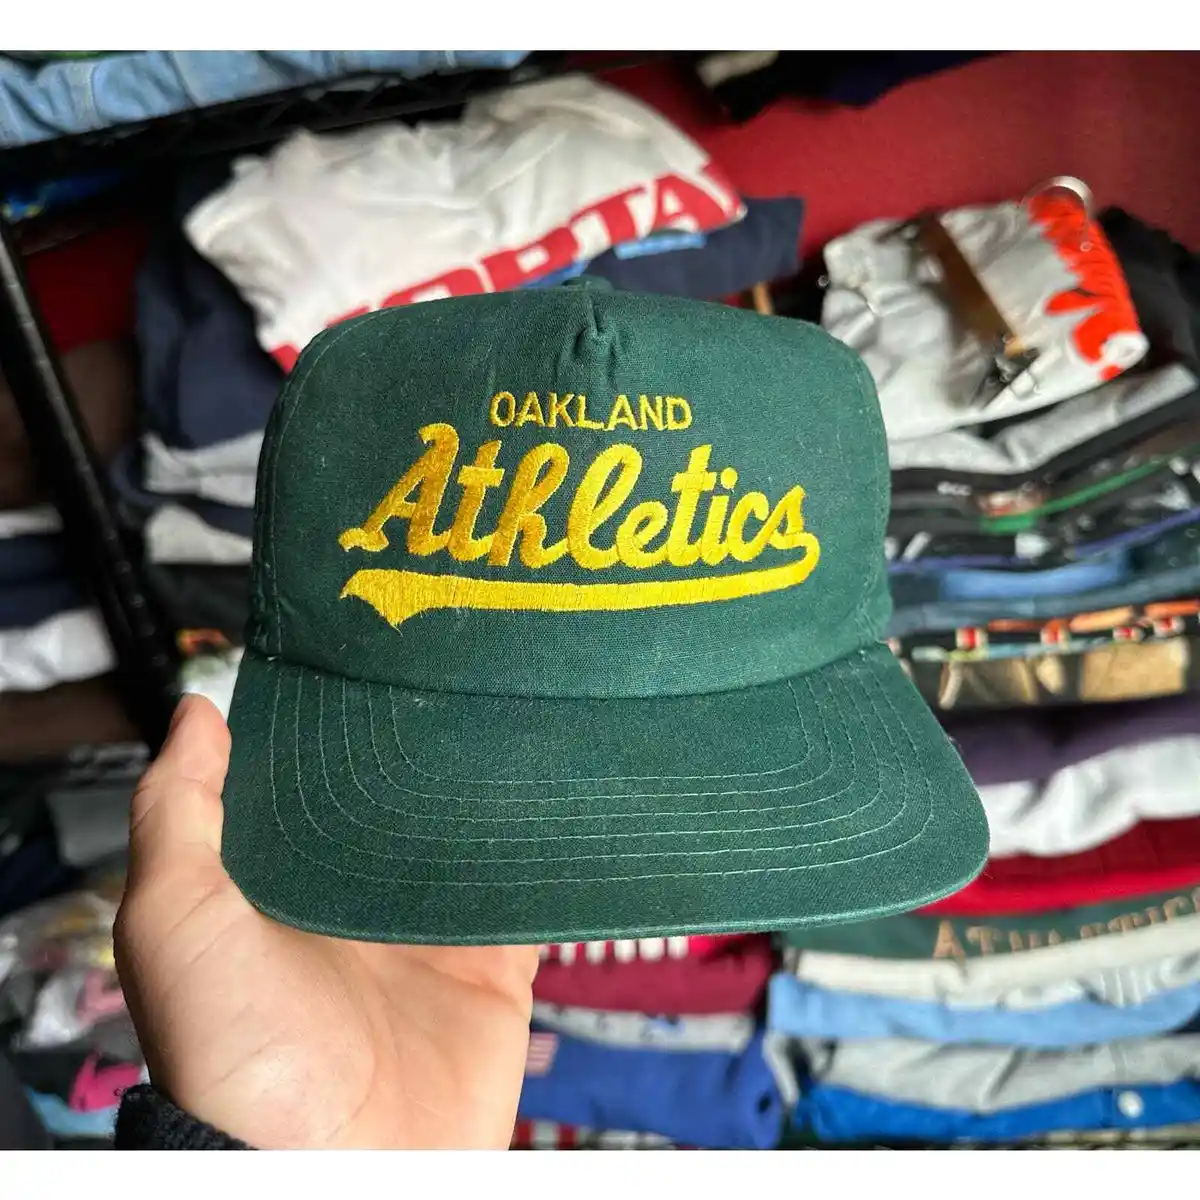 Sports specialties vintage snapback hats for sale ⚡️ (PRICING